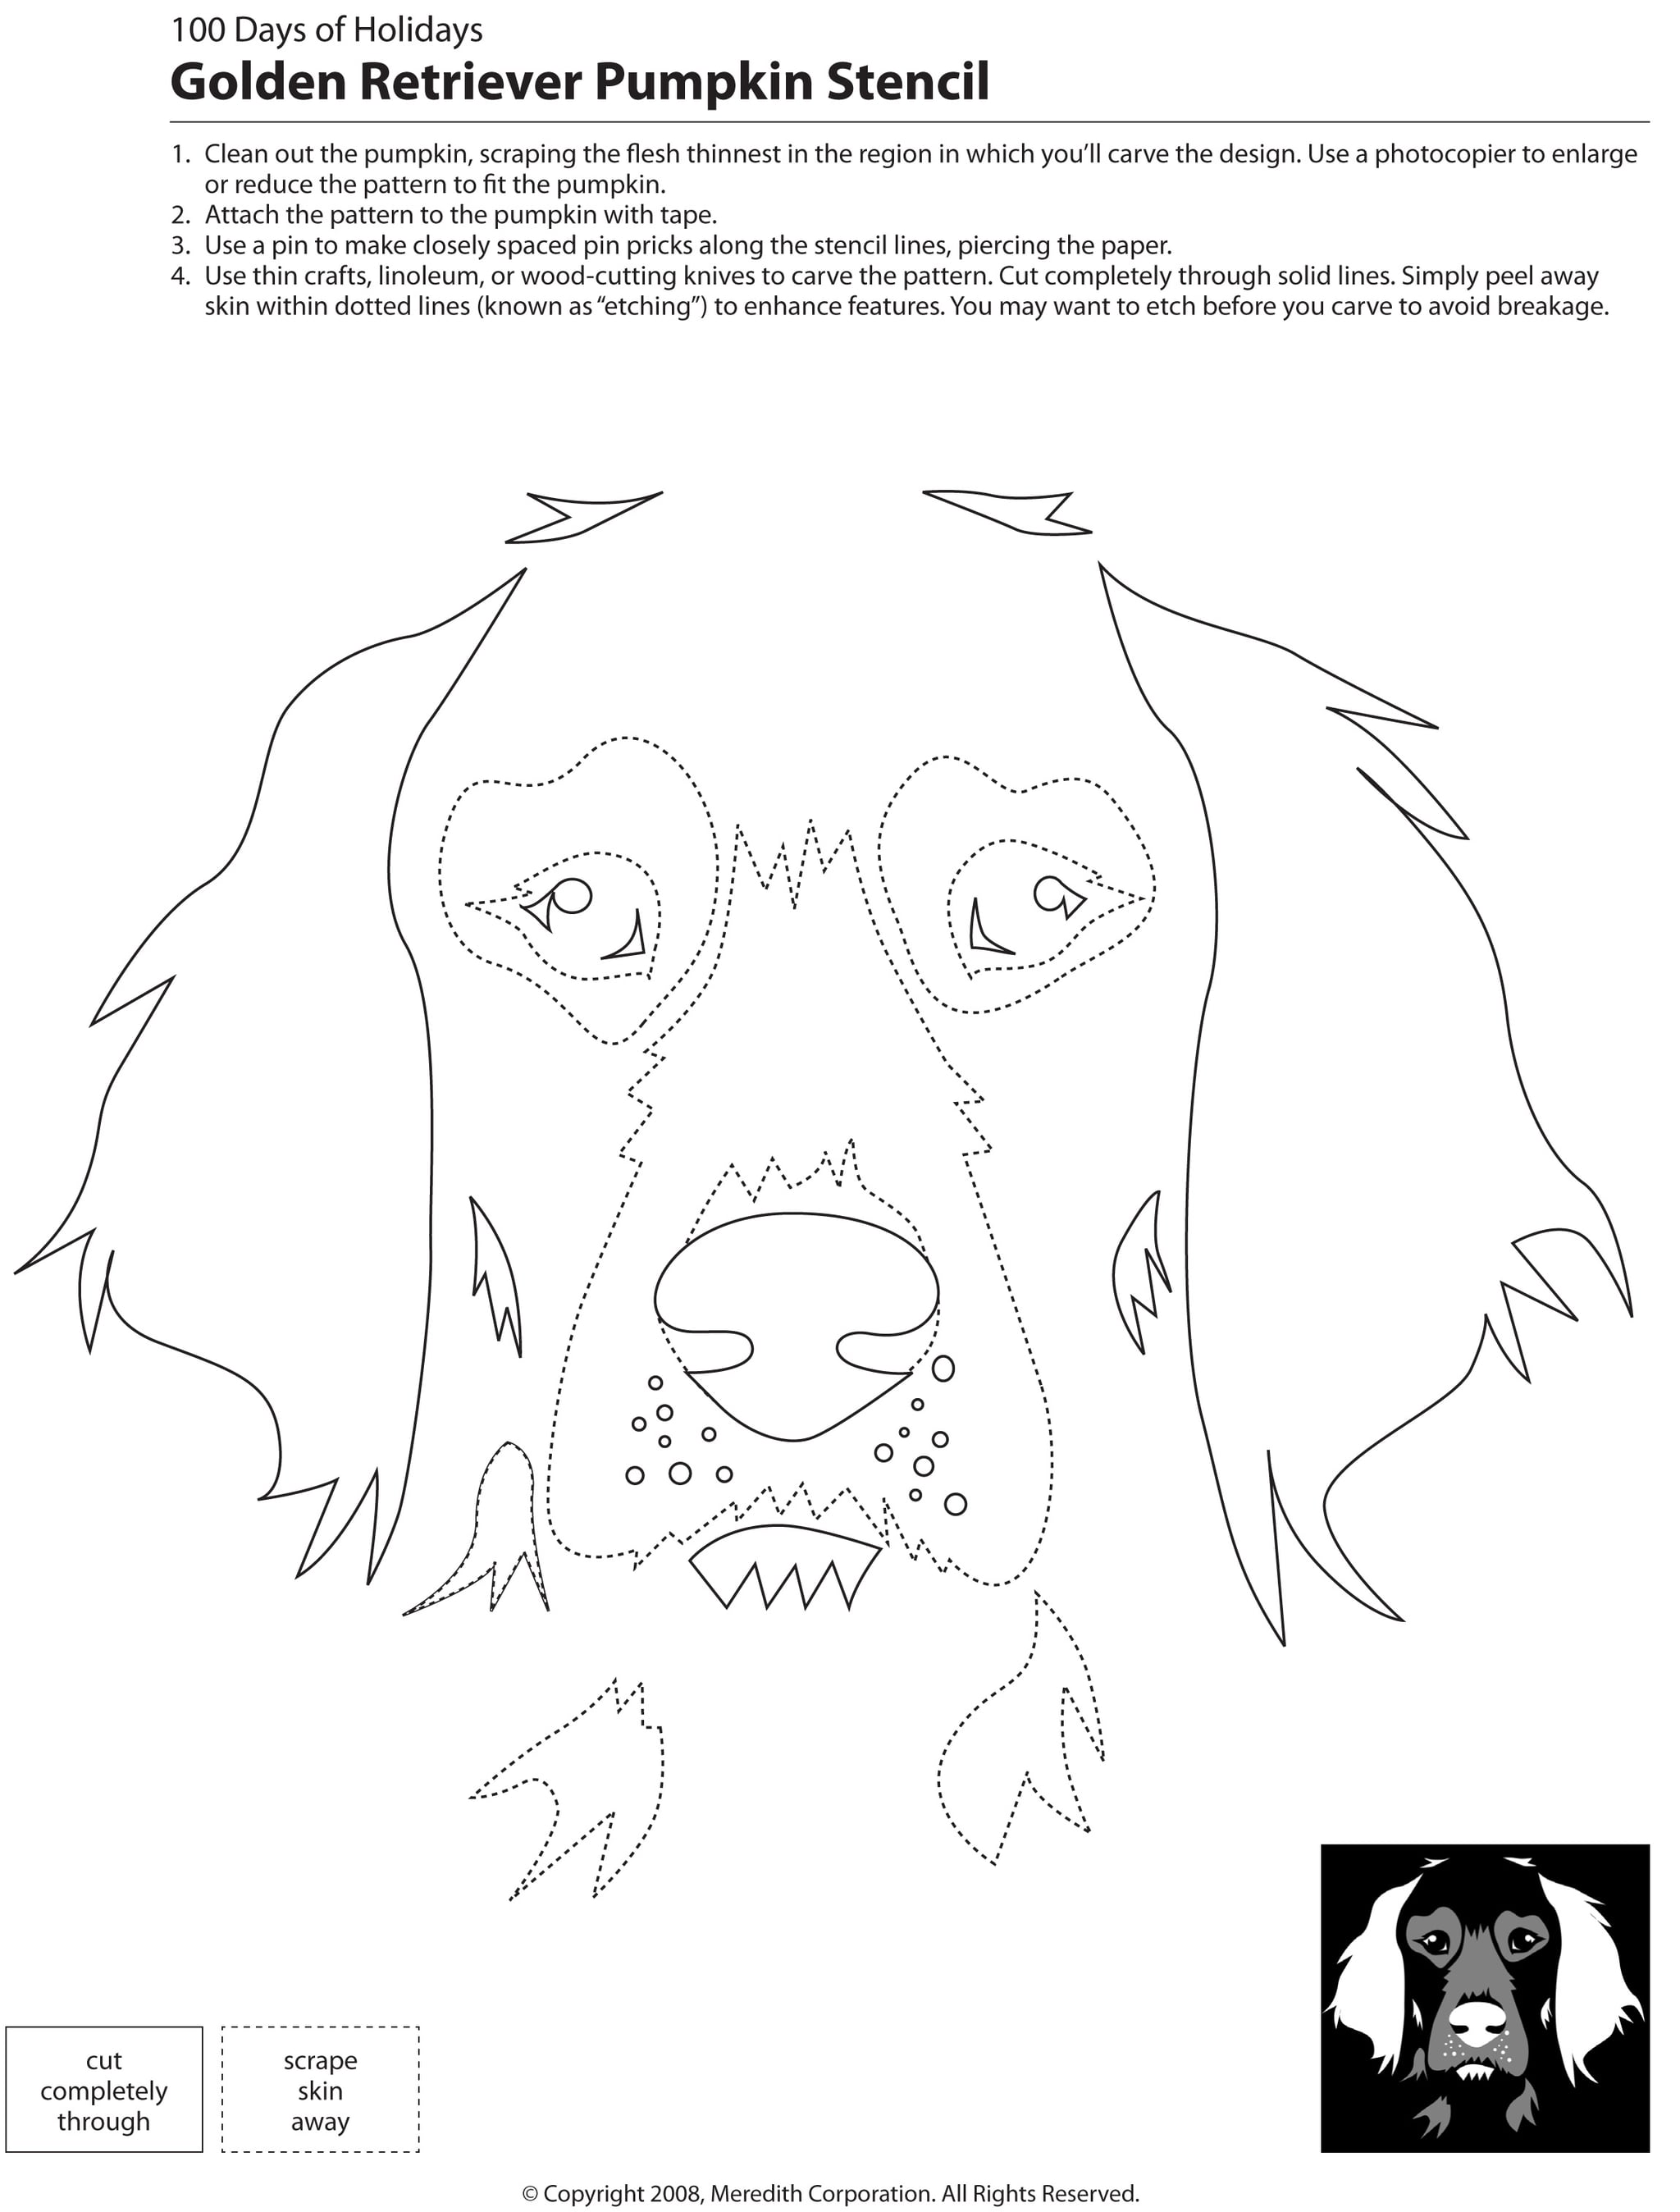 dogs-cats-and-other-pets-22-downloadable-dog-breed-pumpkin-stencils-popsugar-pets